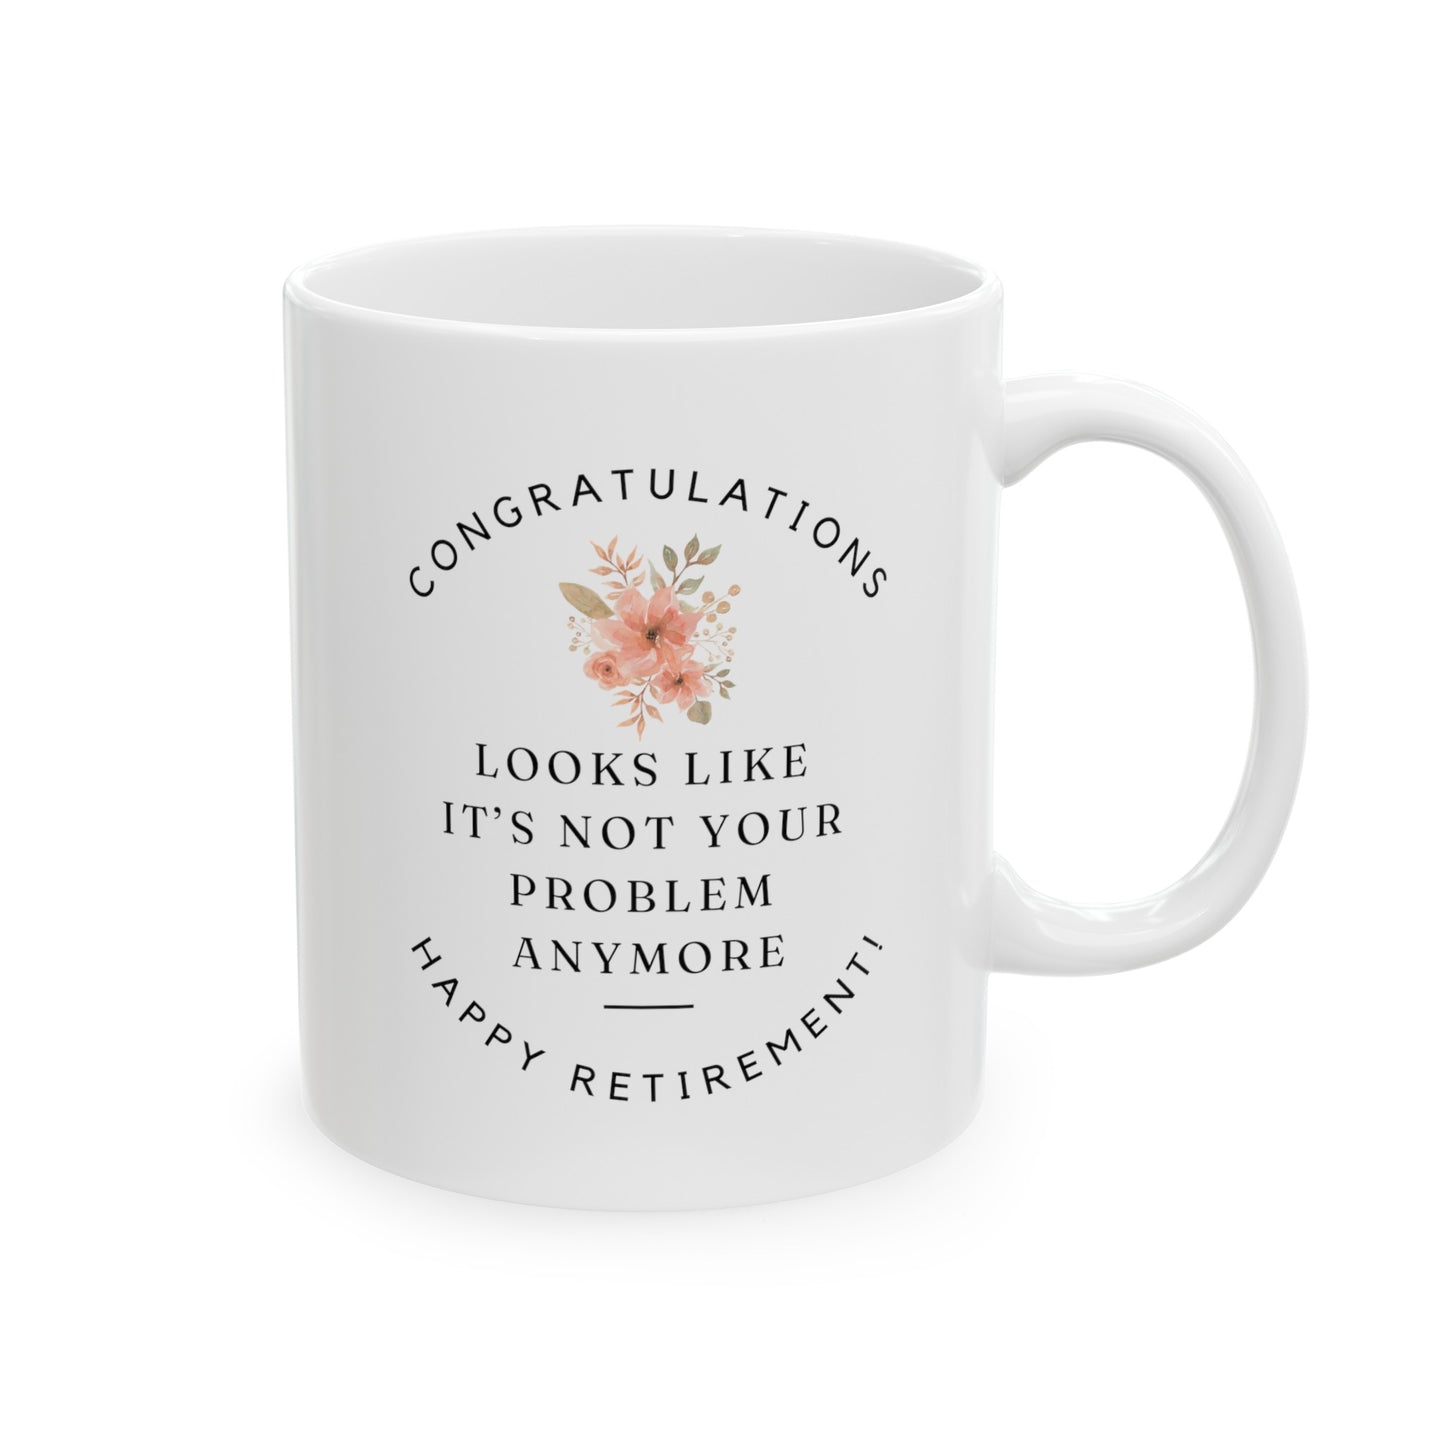 Congratulations Looks Like It's Not Your Problem Anymore Happy Retirement 11oz white funny coffee mug tea cup gift for retiree her teacher coworker waveywares wavey wares wavywares wavy wares